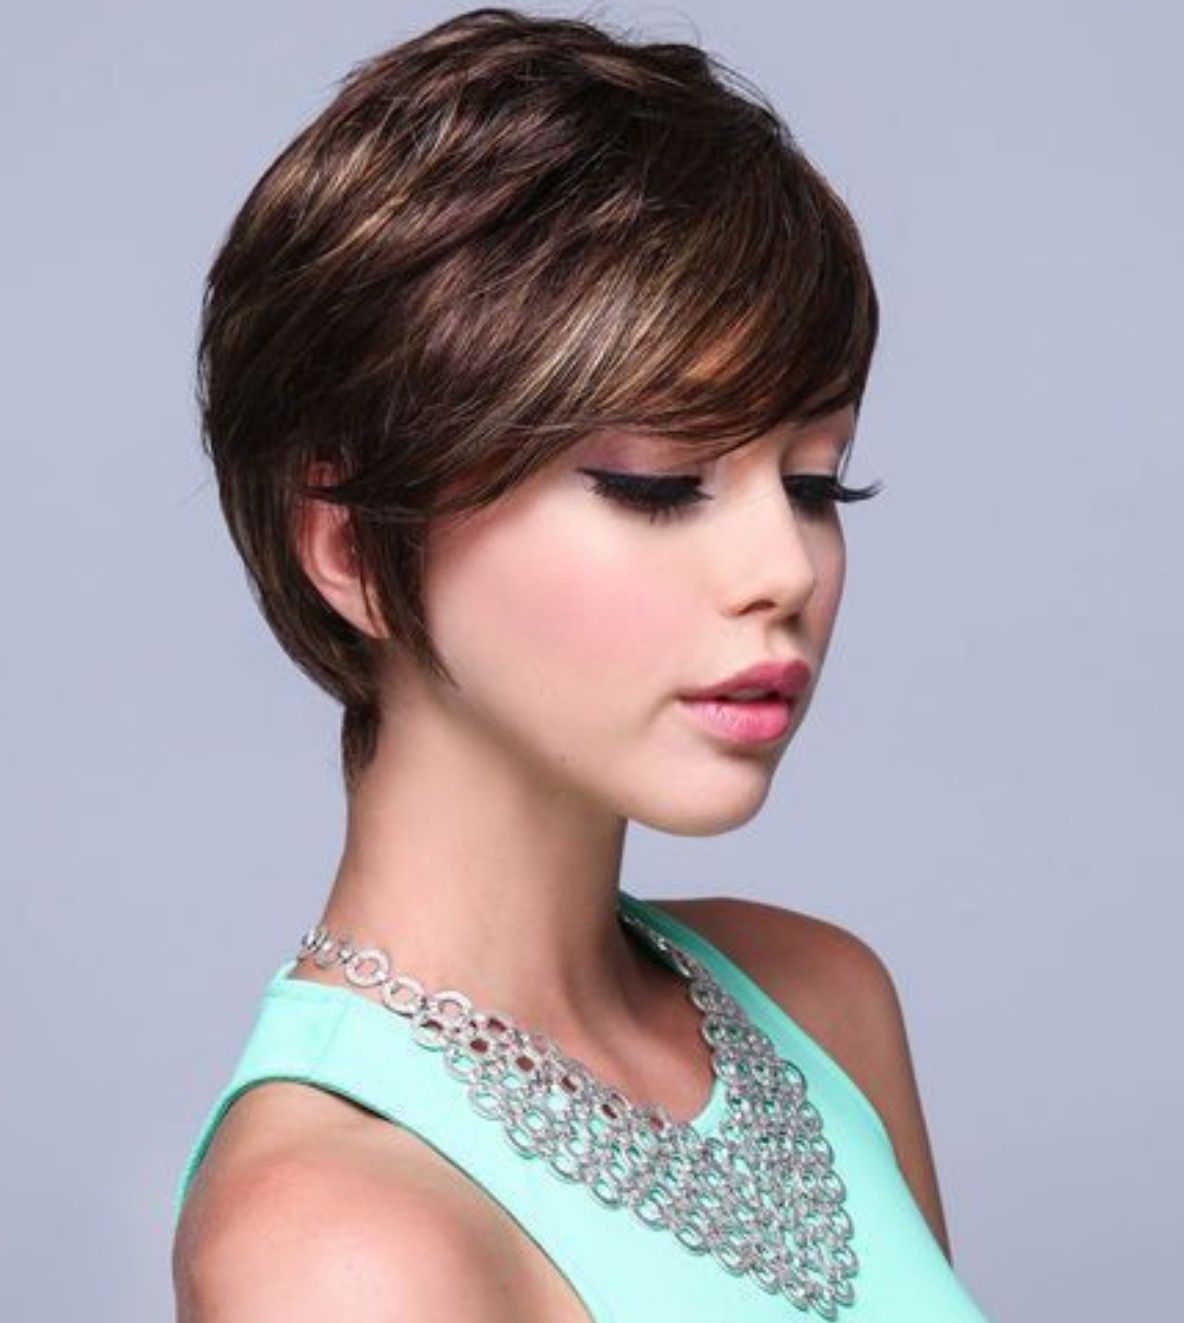 Very Cute Long Pixie Cut | Things That Catch My Eye | Pinterest Intended For Most Popular Long Pixie Hairstyles (View 12 of 15)